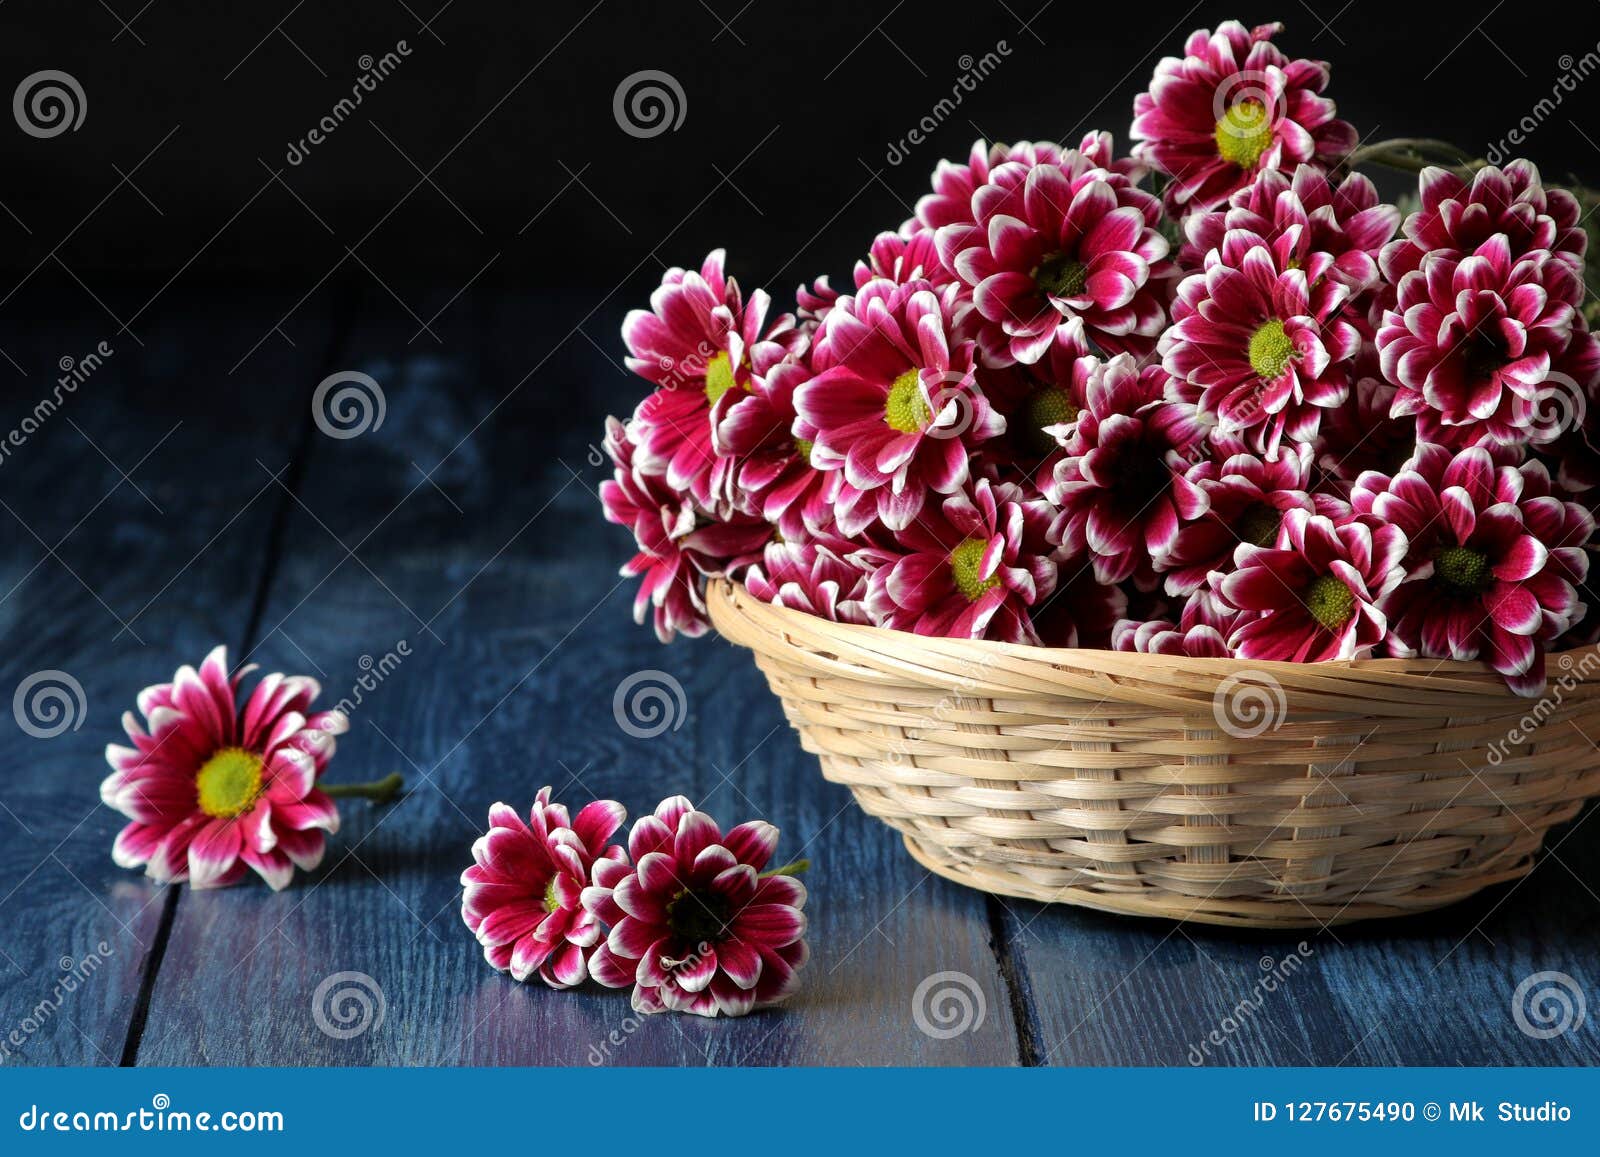 Autumn Chrysanthemum Flowers In A Basket On A Dark Blue Wooden Table Stock Photo Image Of Colorful Blooming 127675490